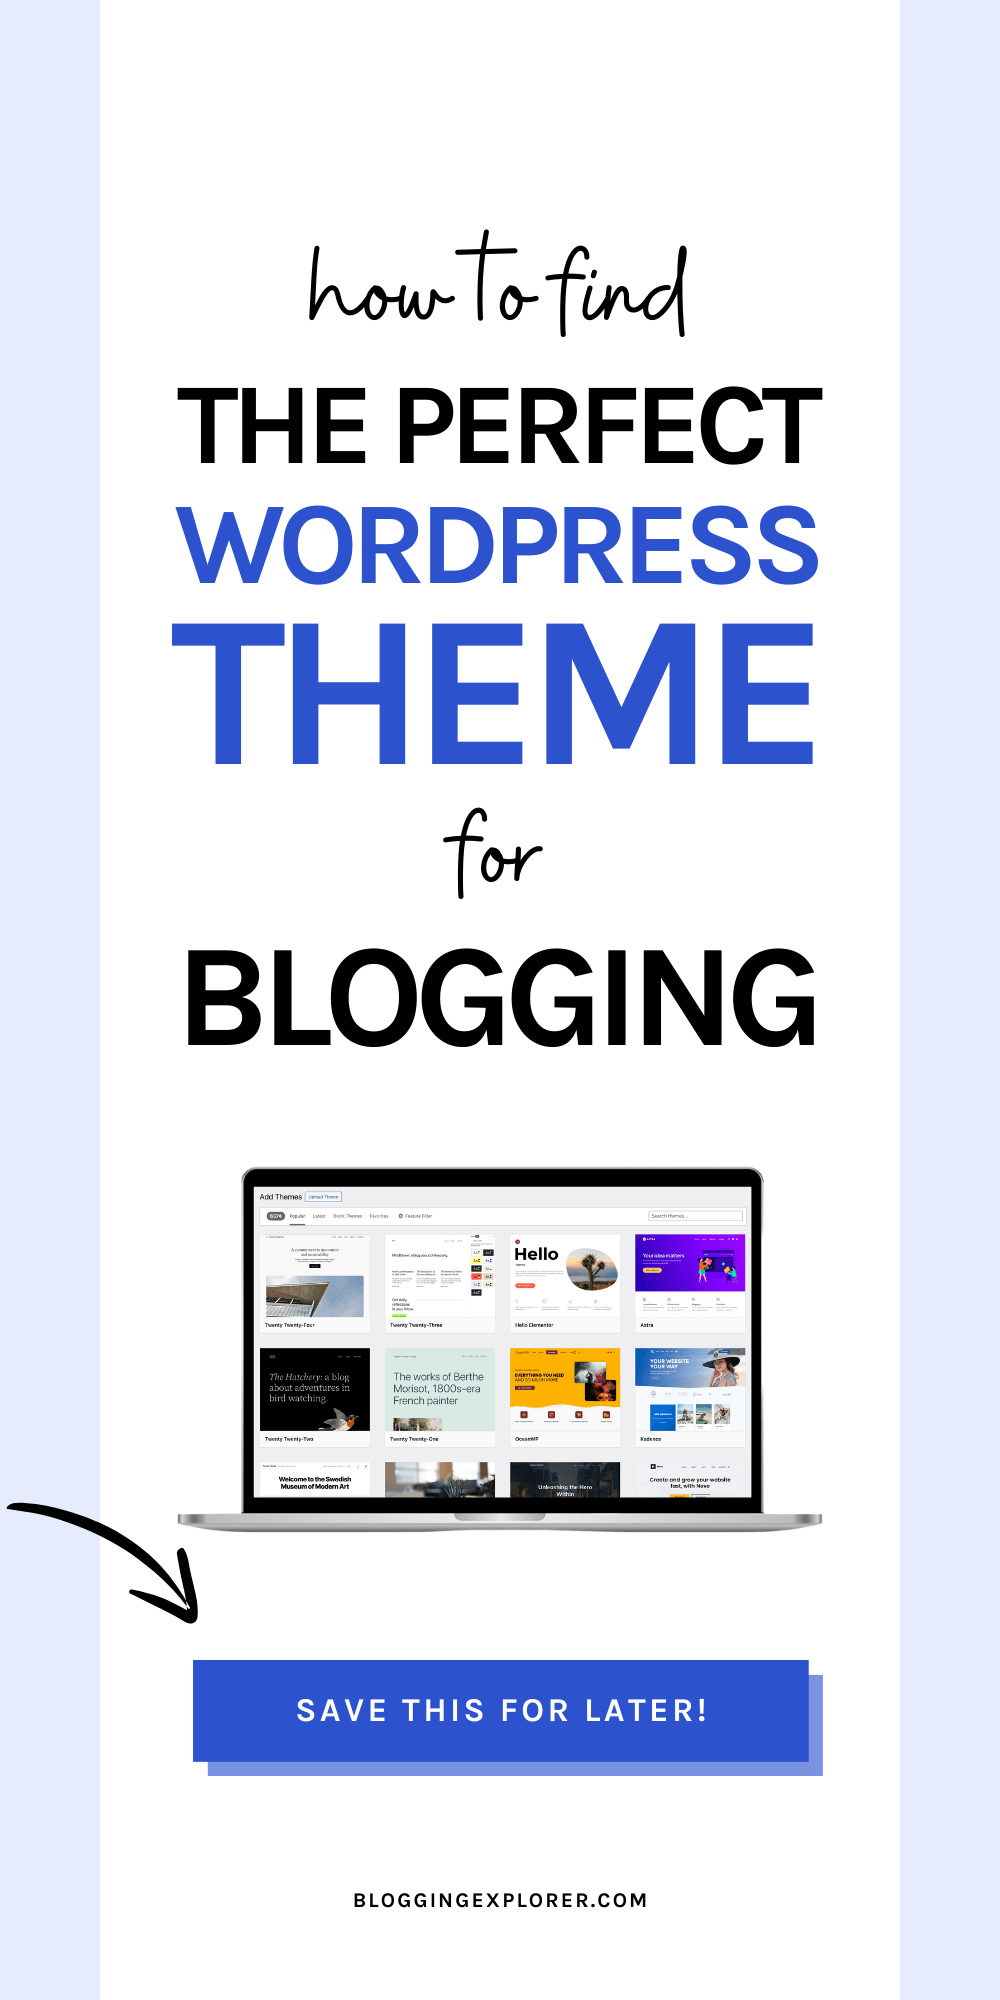 How to find the perfect WordPress theme for blogging – Free guide for beginners